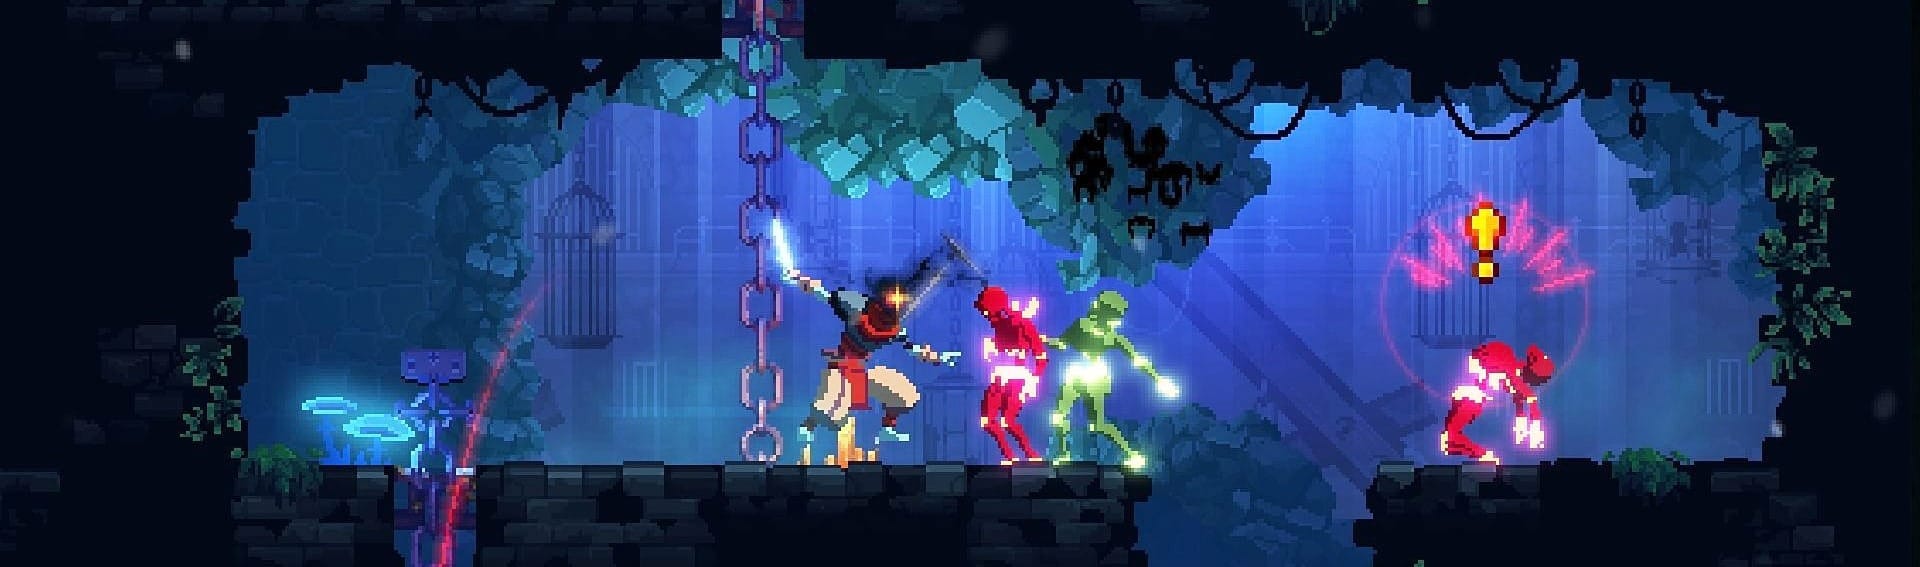 A screenshot from the Dead Cells game of active fighting of the main character with multiple enemies.